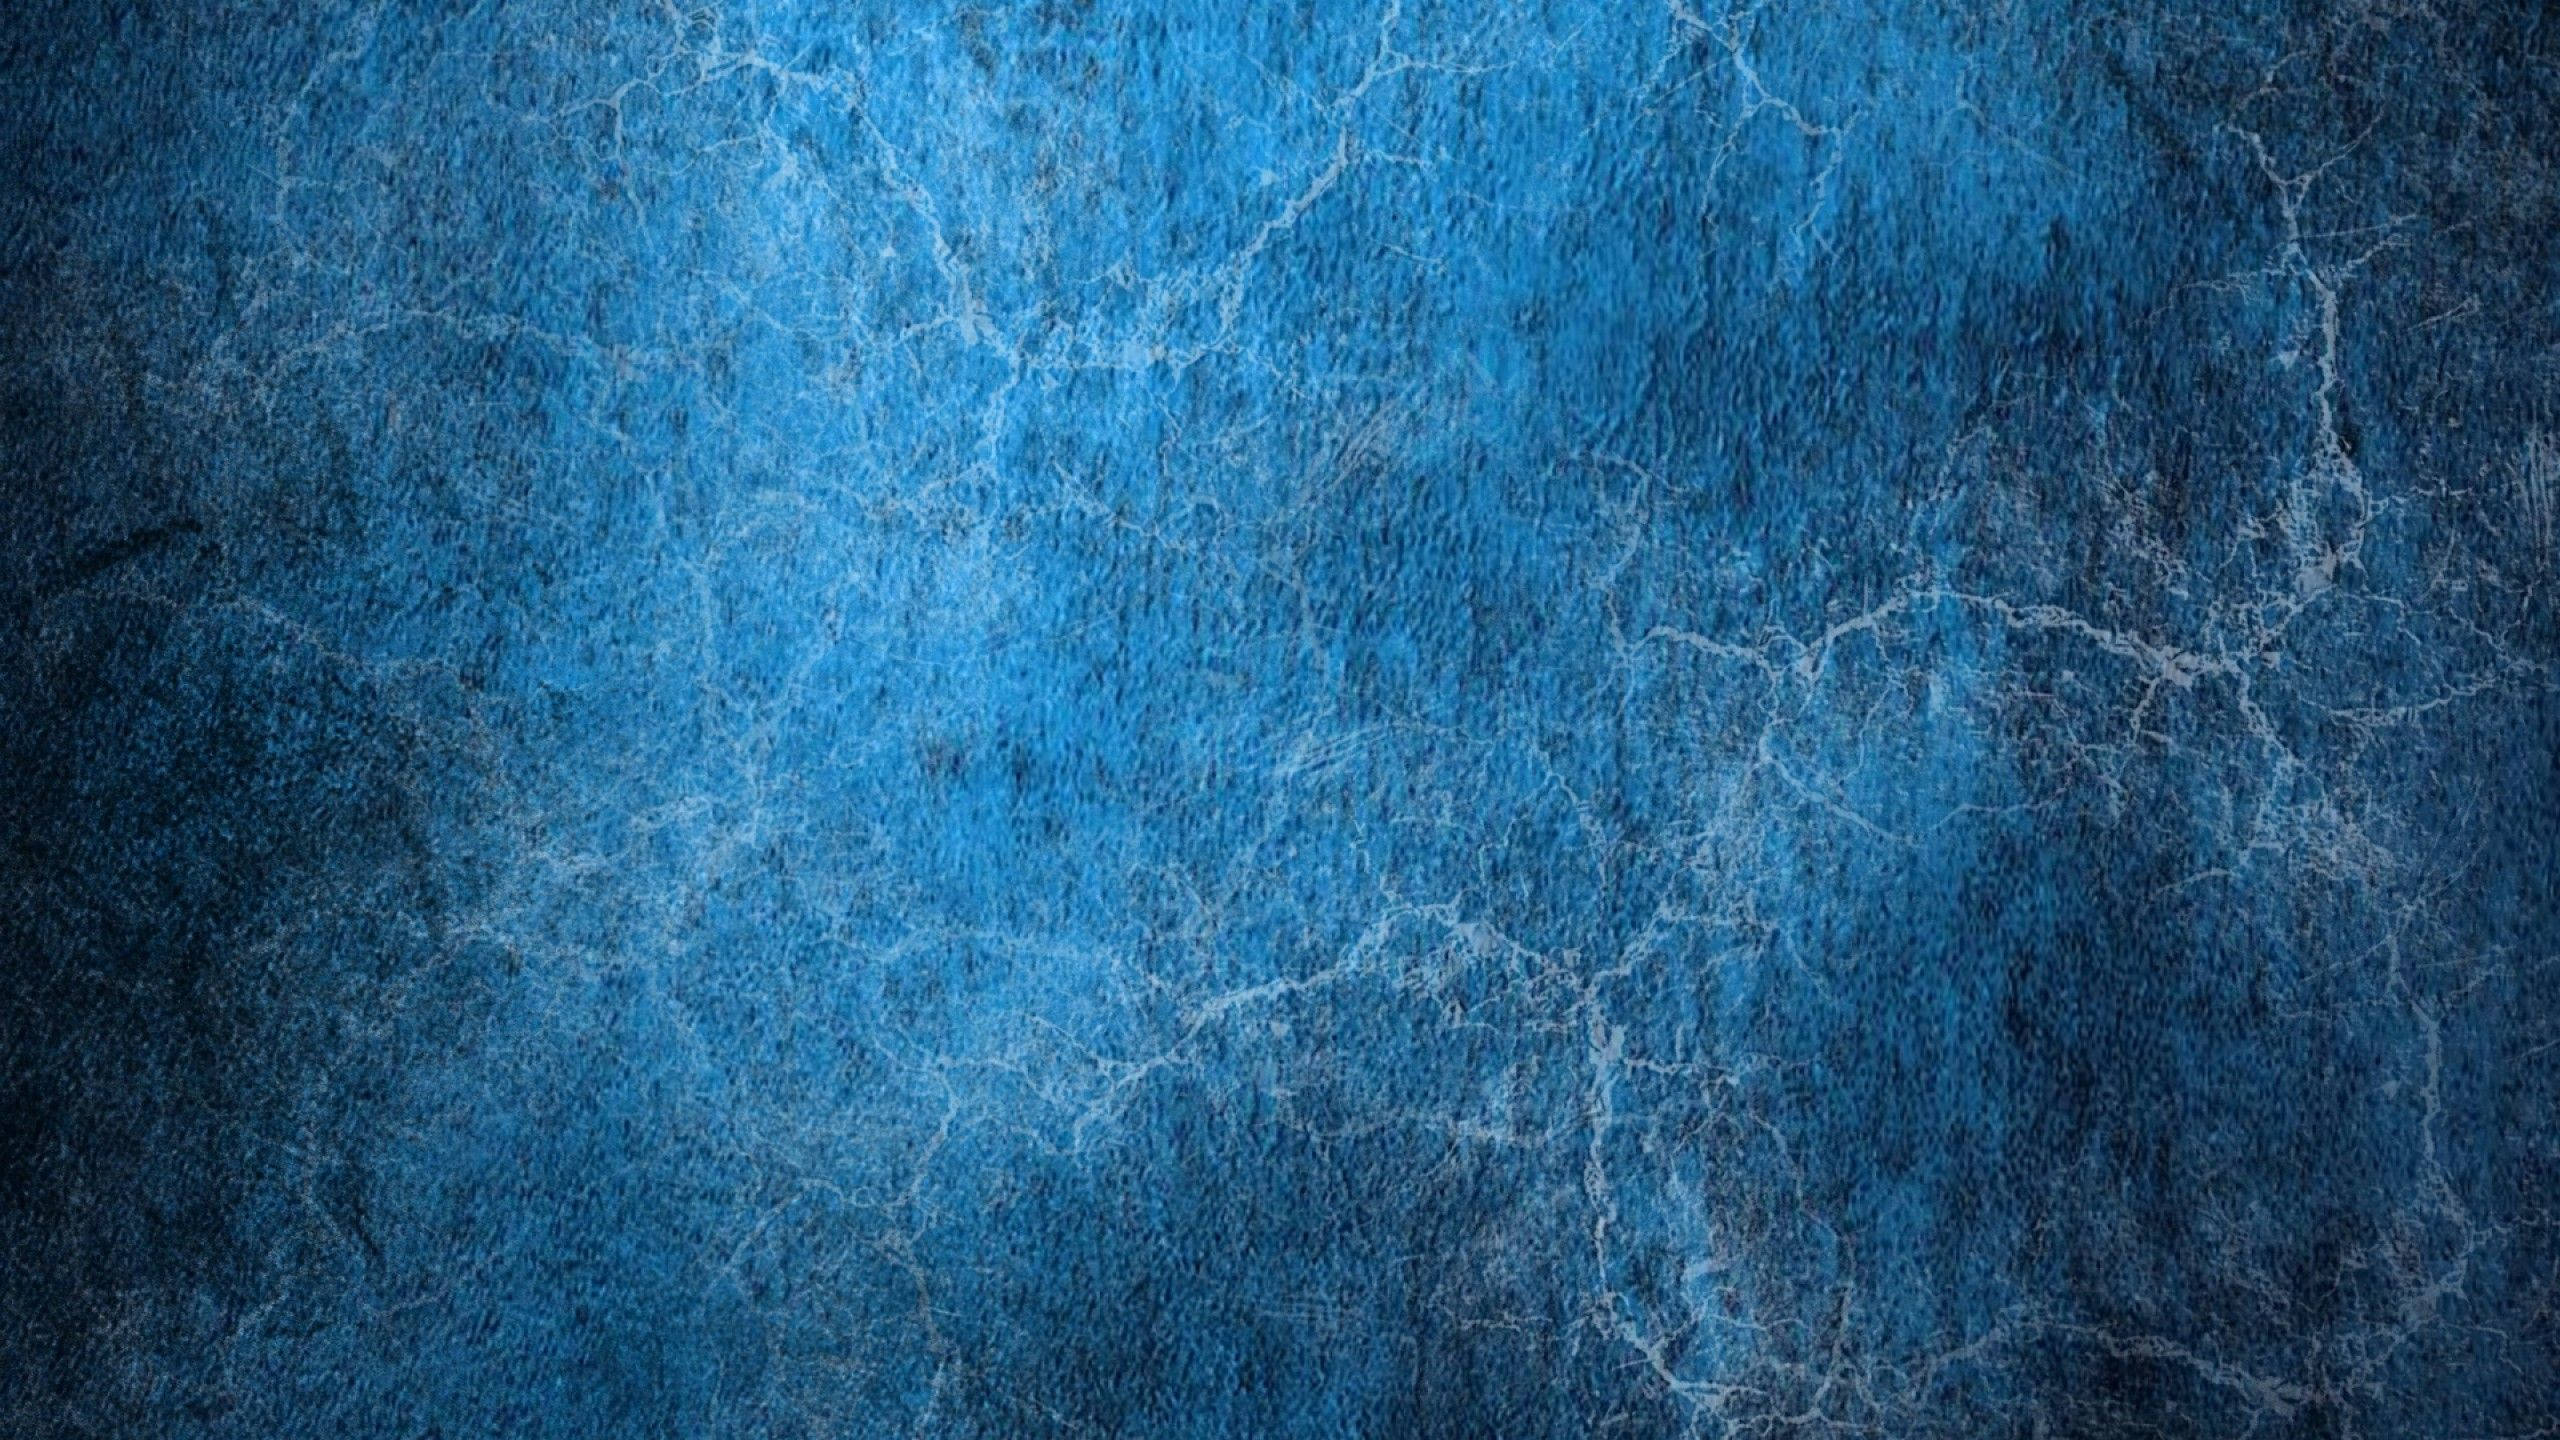 Stunning Blue Cracked Wall Texture | Youtube Channel Art Wallpaper